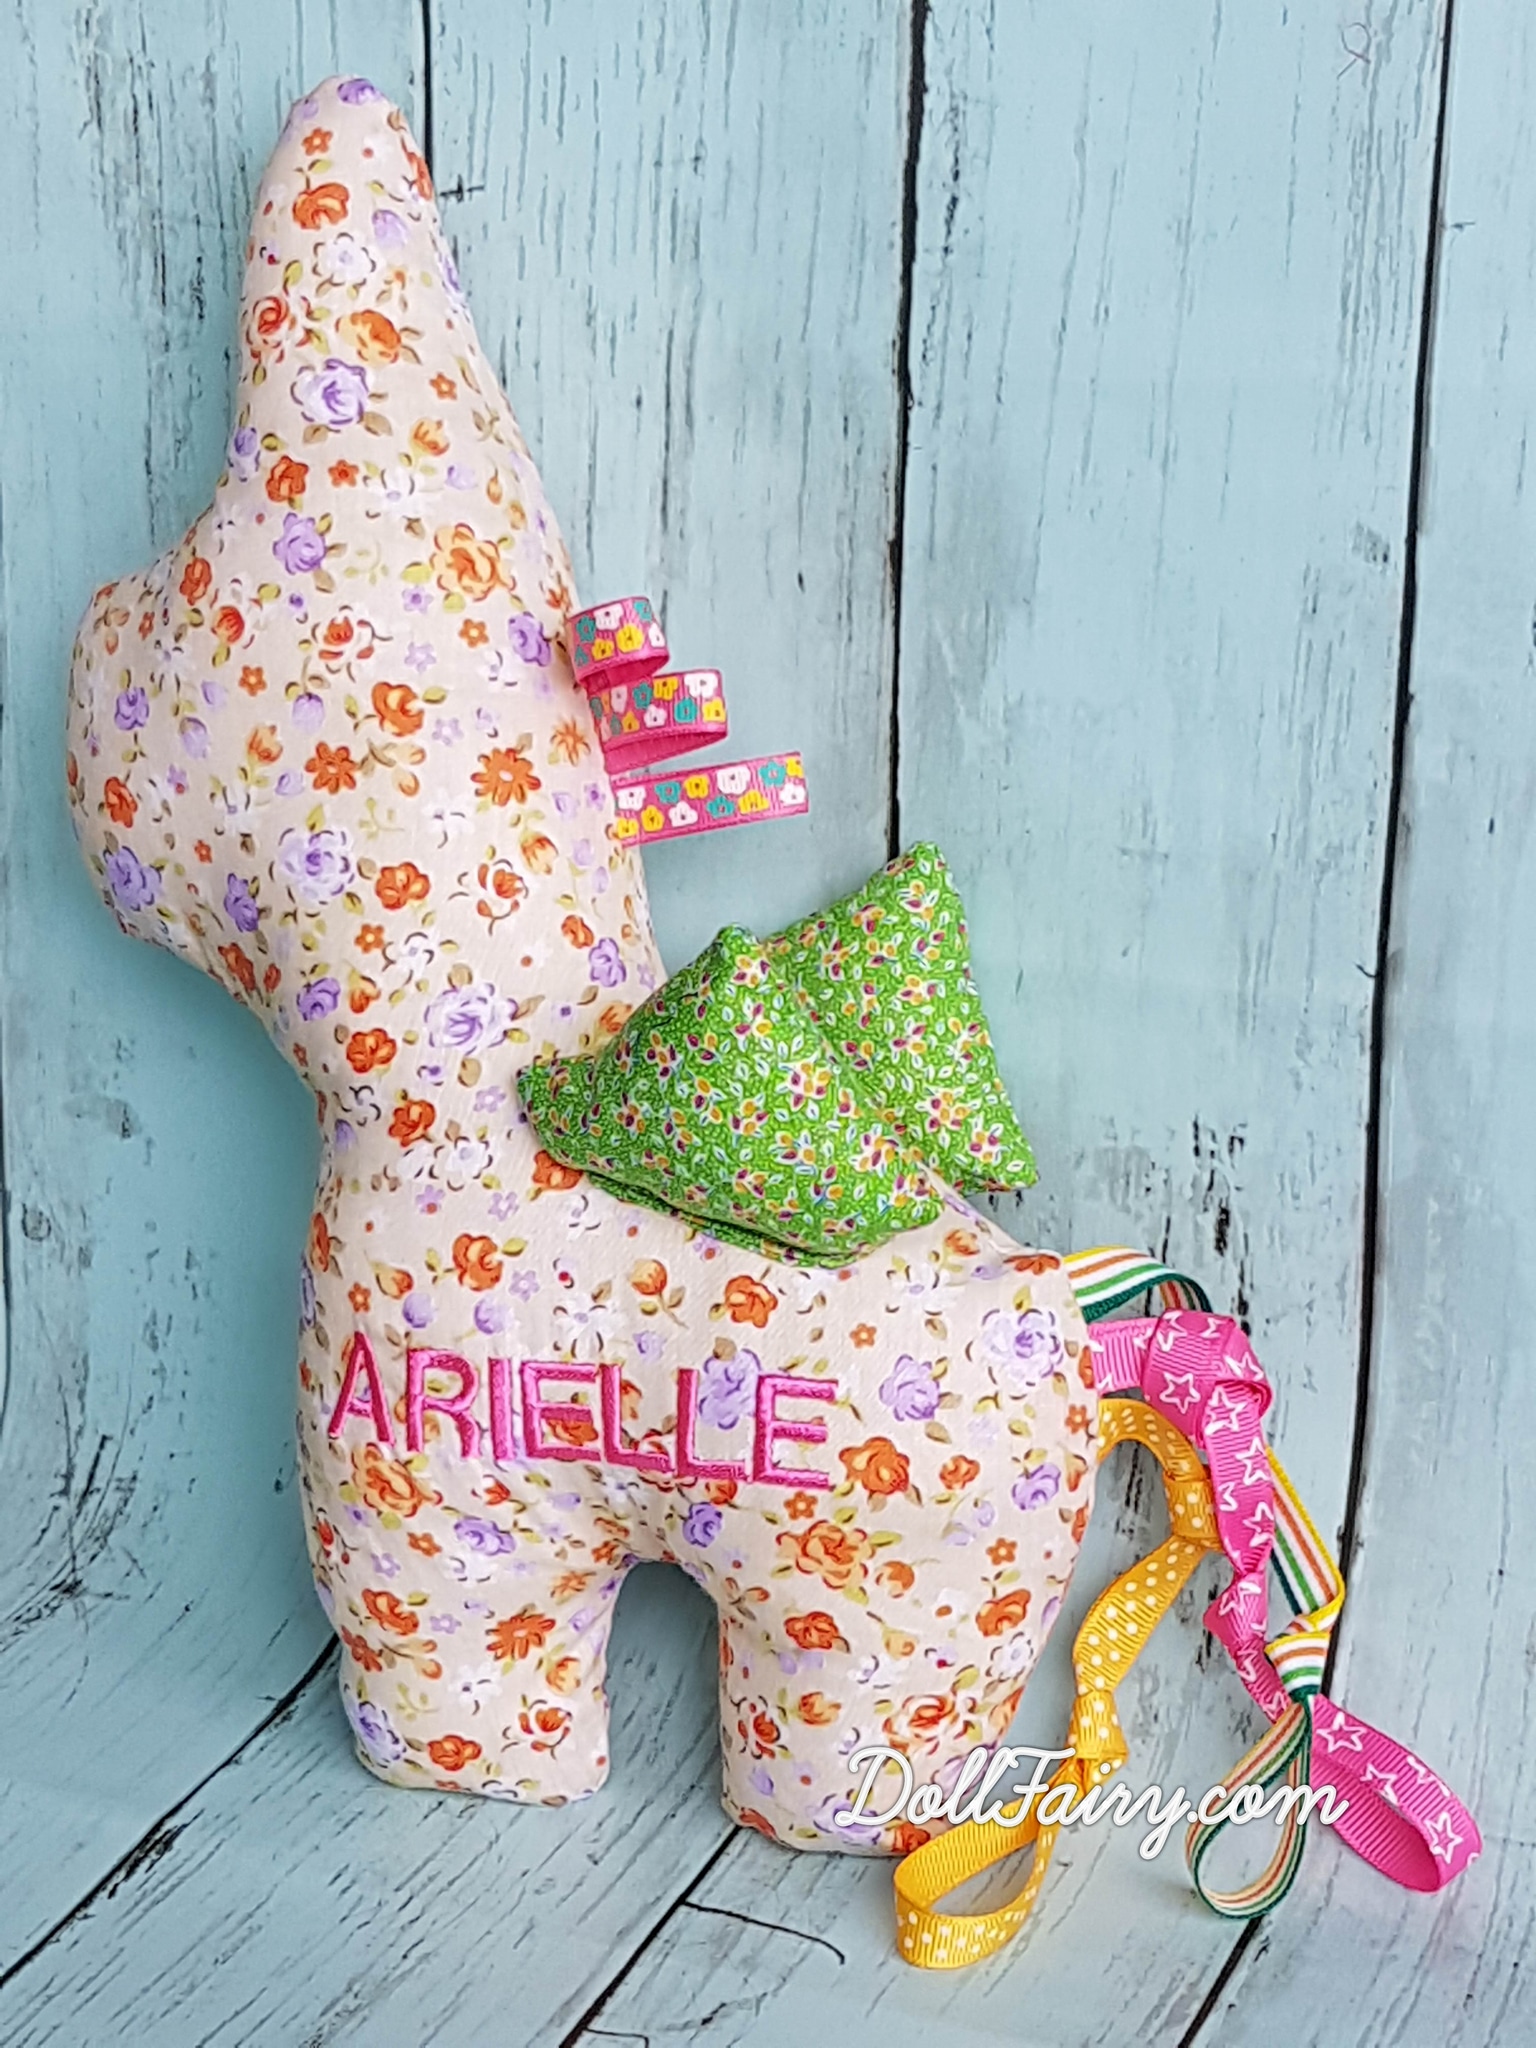 Unicorn Plushie Taggies with Personalised Name For Arielle